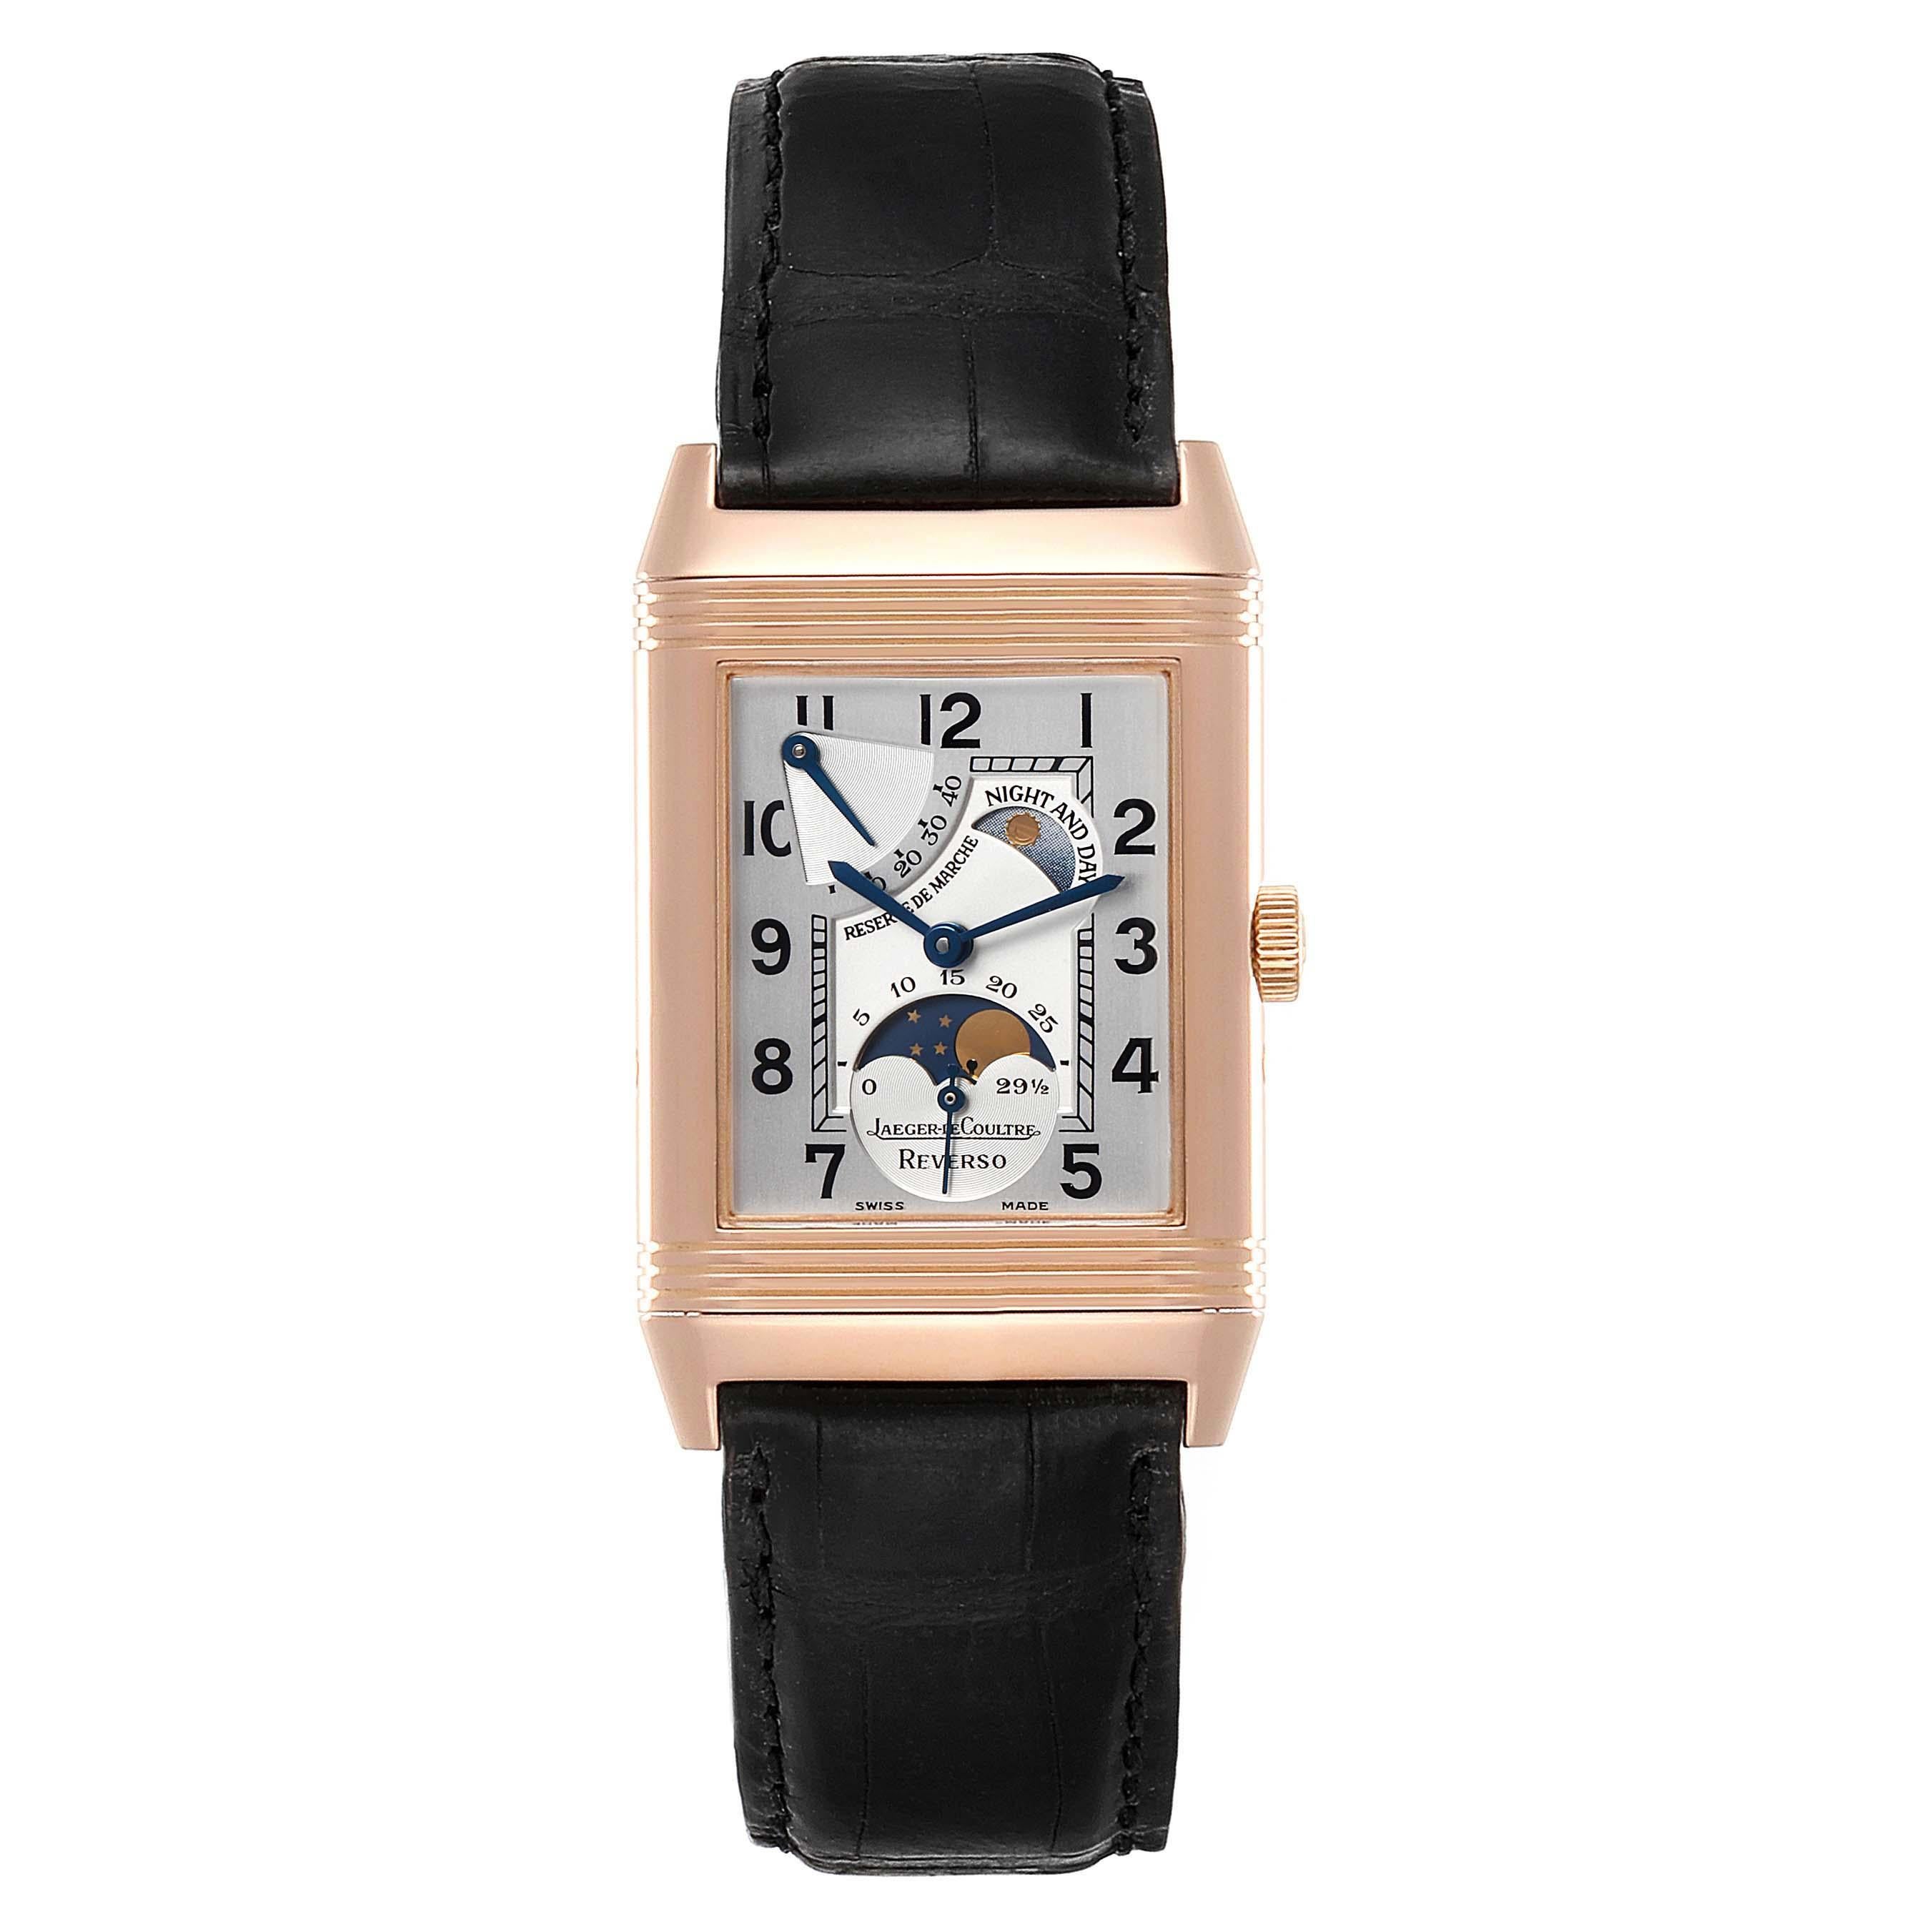 Jaeger LeCoultre Reverso Sun Moon Rose Gold Watch 270.2.63 Q3042420. Manual winding movement. 18K rose gold 42.2 x 26.1 mm case rectangular rotating case. Exhibition case back. 18K rose gold ribbed bezel. Scratch resistant sapphire crystal. Silver